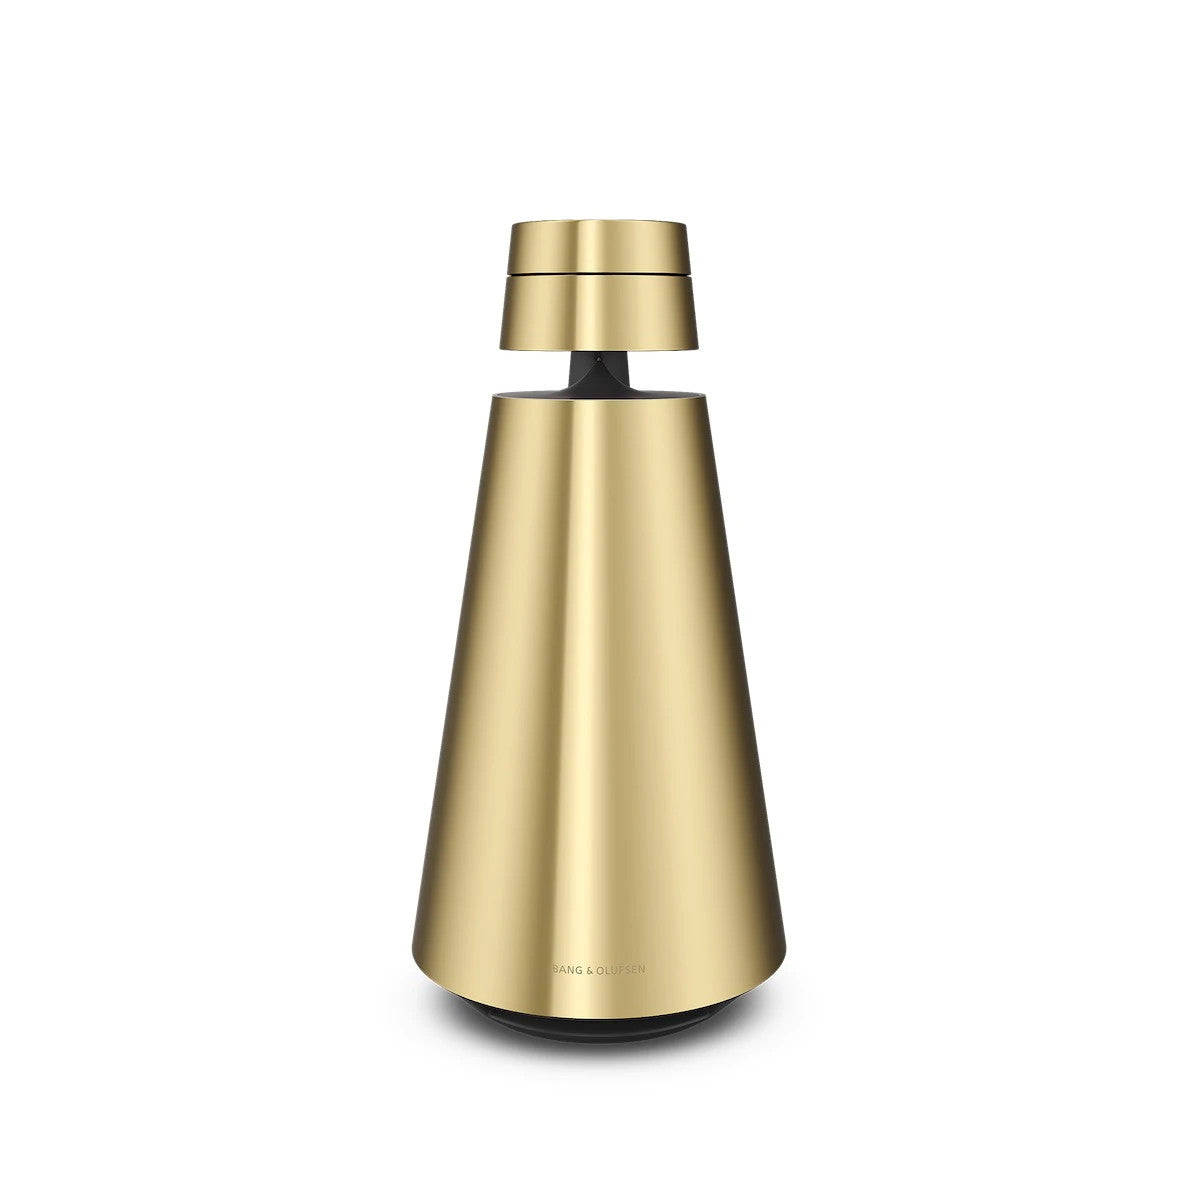 Bang & Olufsen Beosound 1 Portable Multiroom Speaker with Google Assistant (Brass Tone) - Ooberpad India